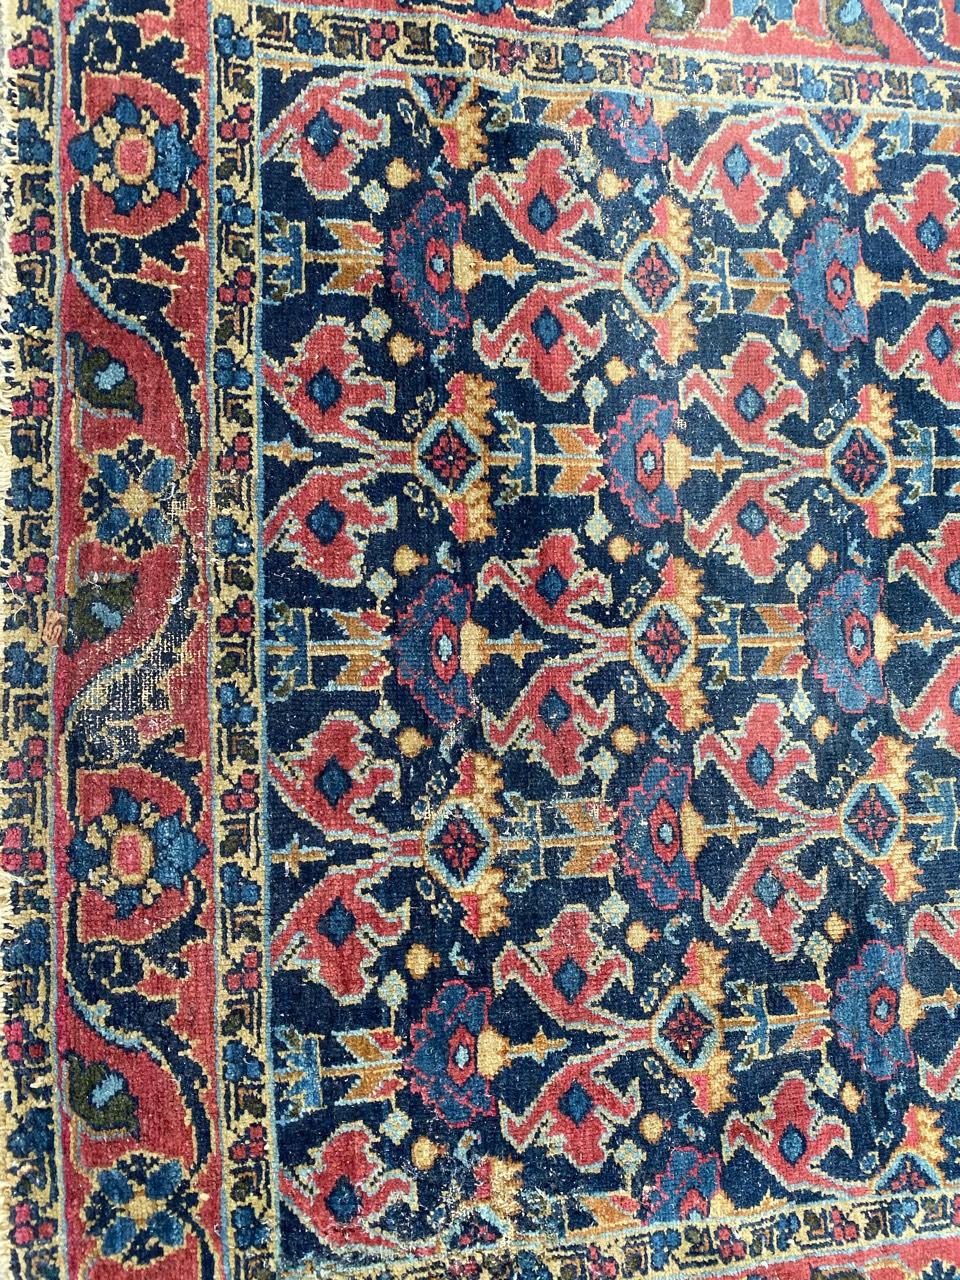 Very beautiful vintage decorative rug with nice design and colors with blue, red and yellow, entirely hand knotted with wool velvet on cotton foundation.

✨✨✨
